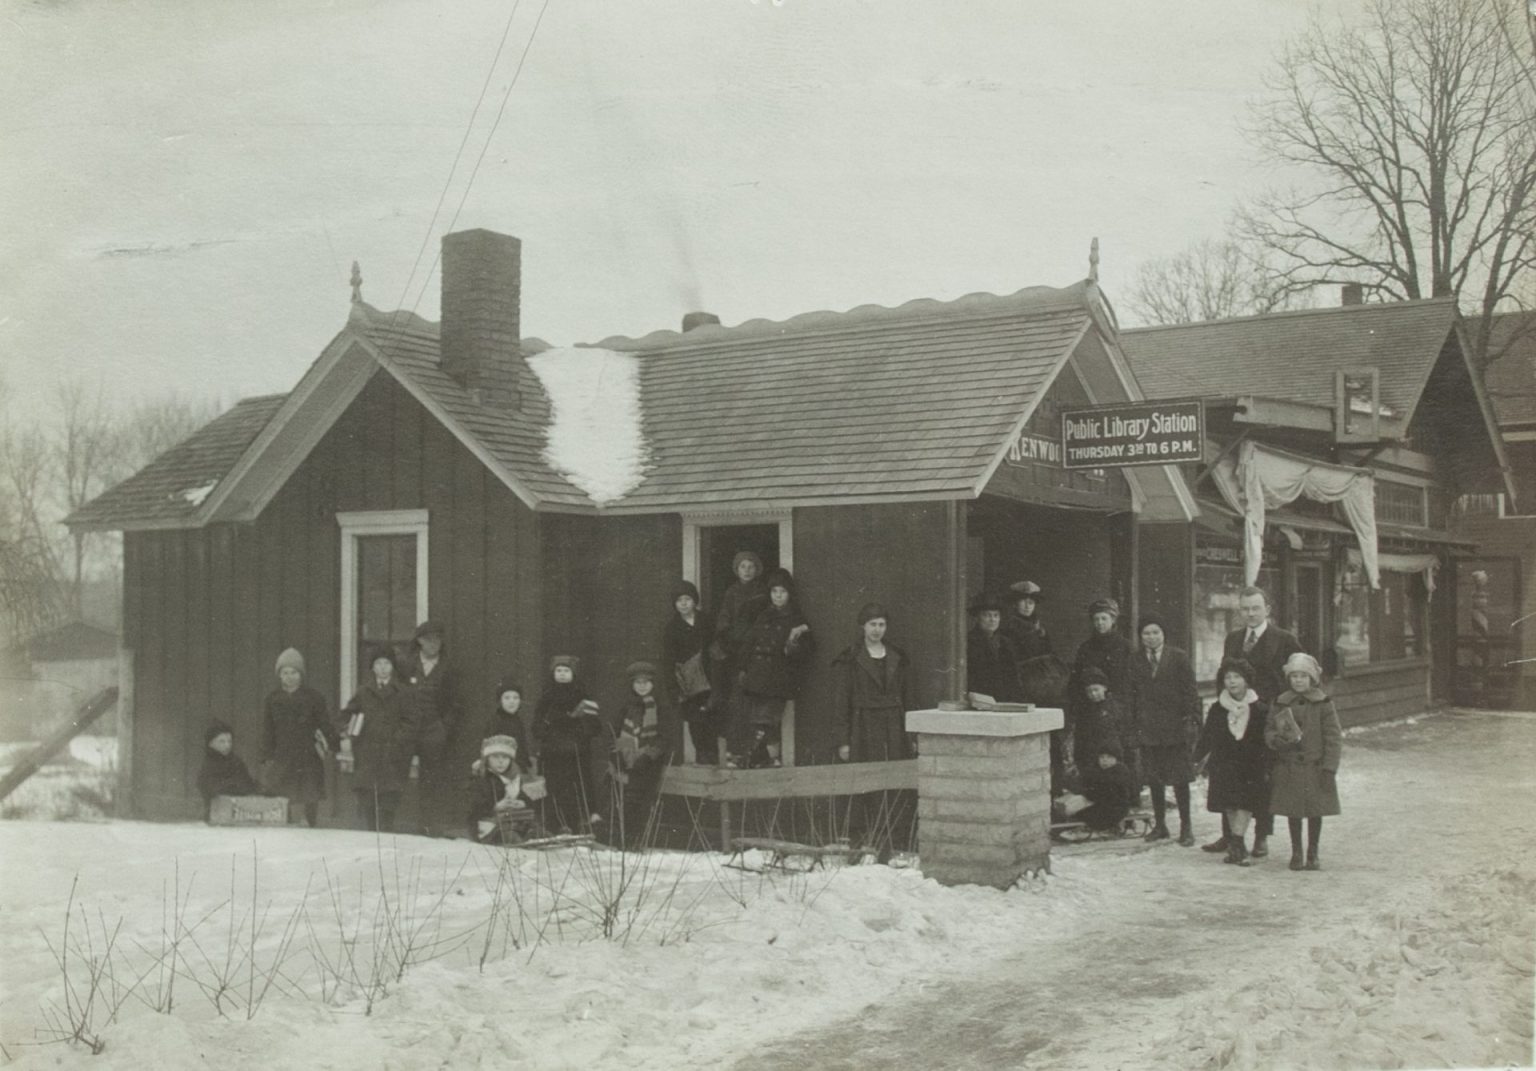 Children in winter coats stand in the snow in front of a small building, the first Kenwood branch, in this black and white photo.